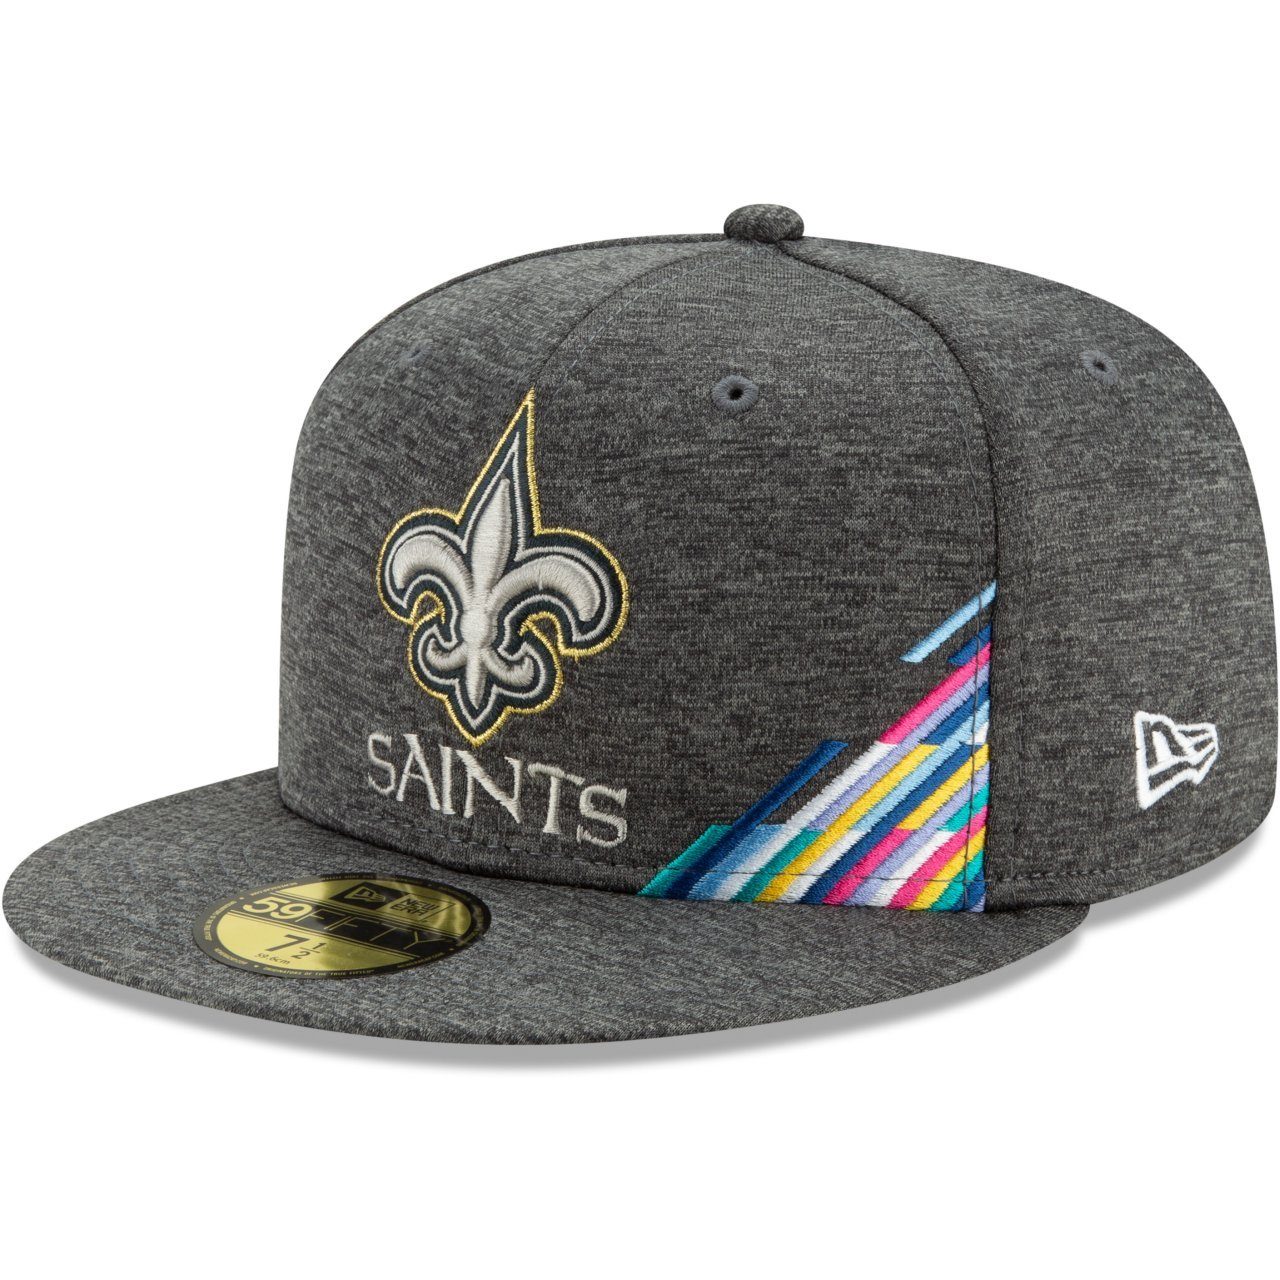 Neue Ware eingetroffen New Era Fitted Cap Saints NFL New Orleans Teams 59Fifty CATCH CRUCIAL